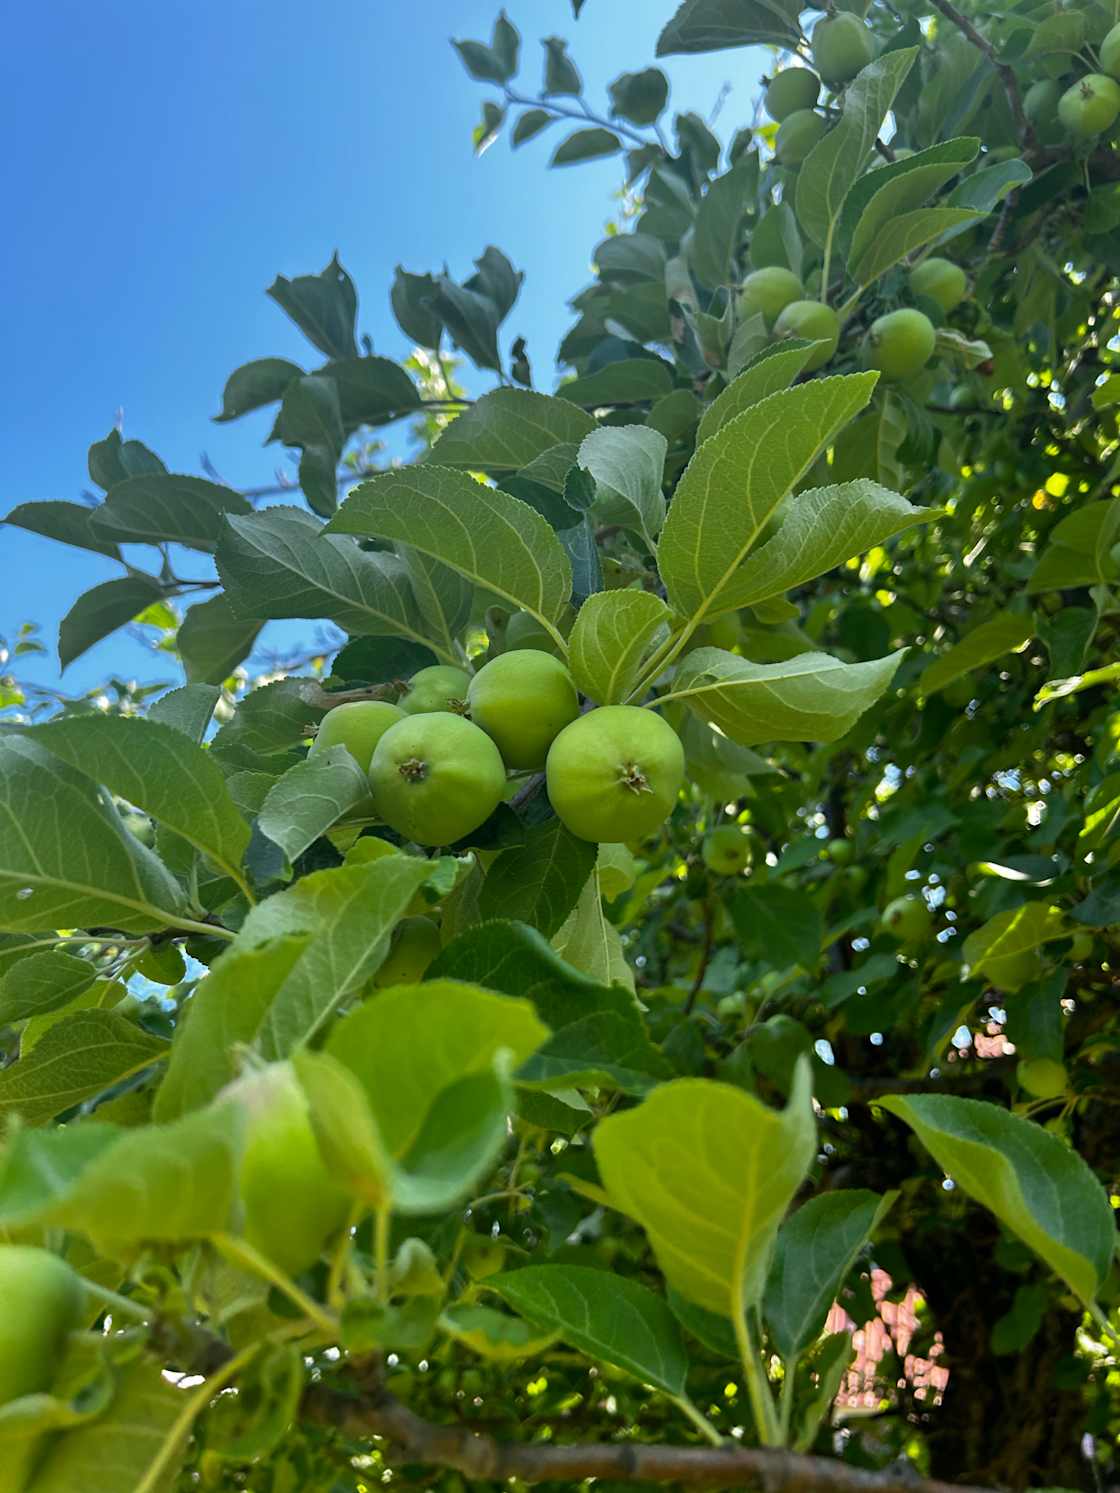 The apples in mid-July are still tiny, but promising! 